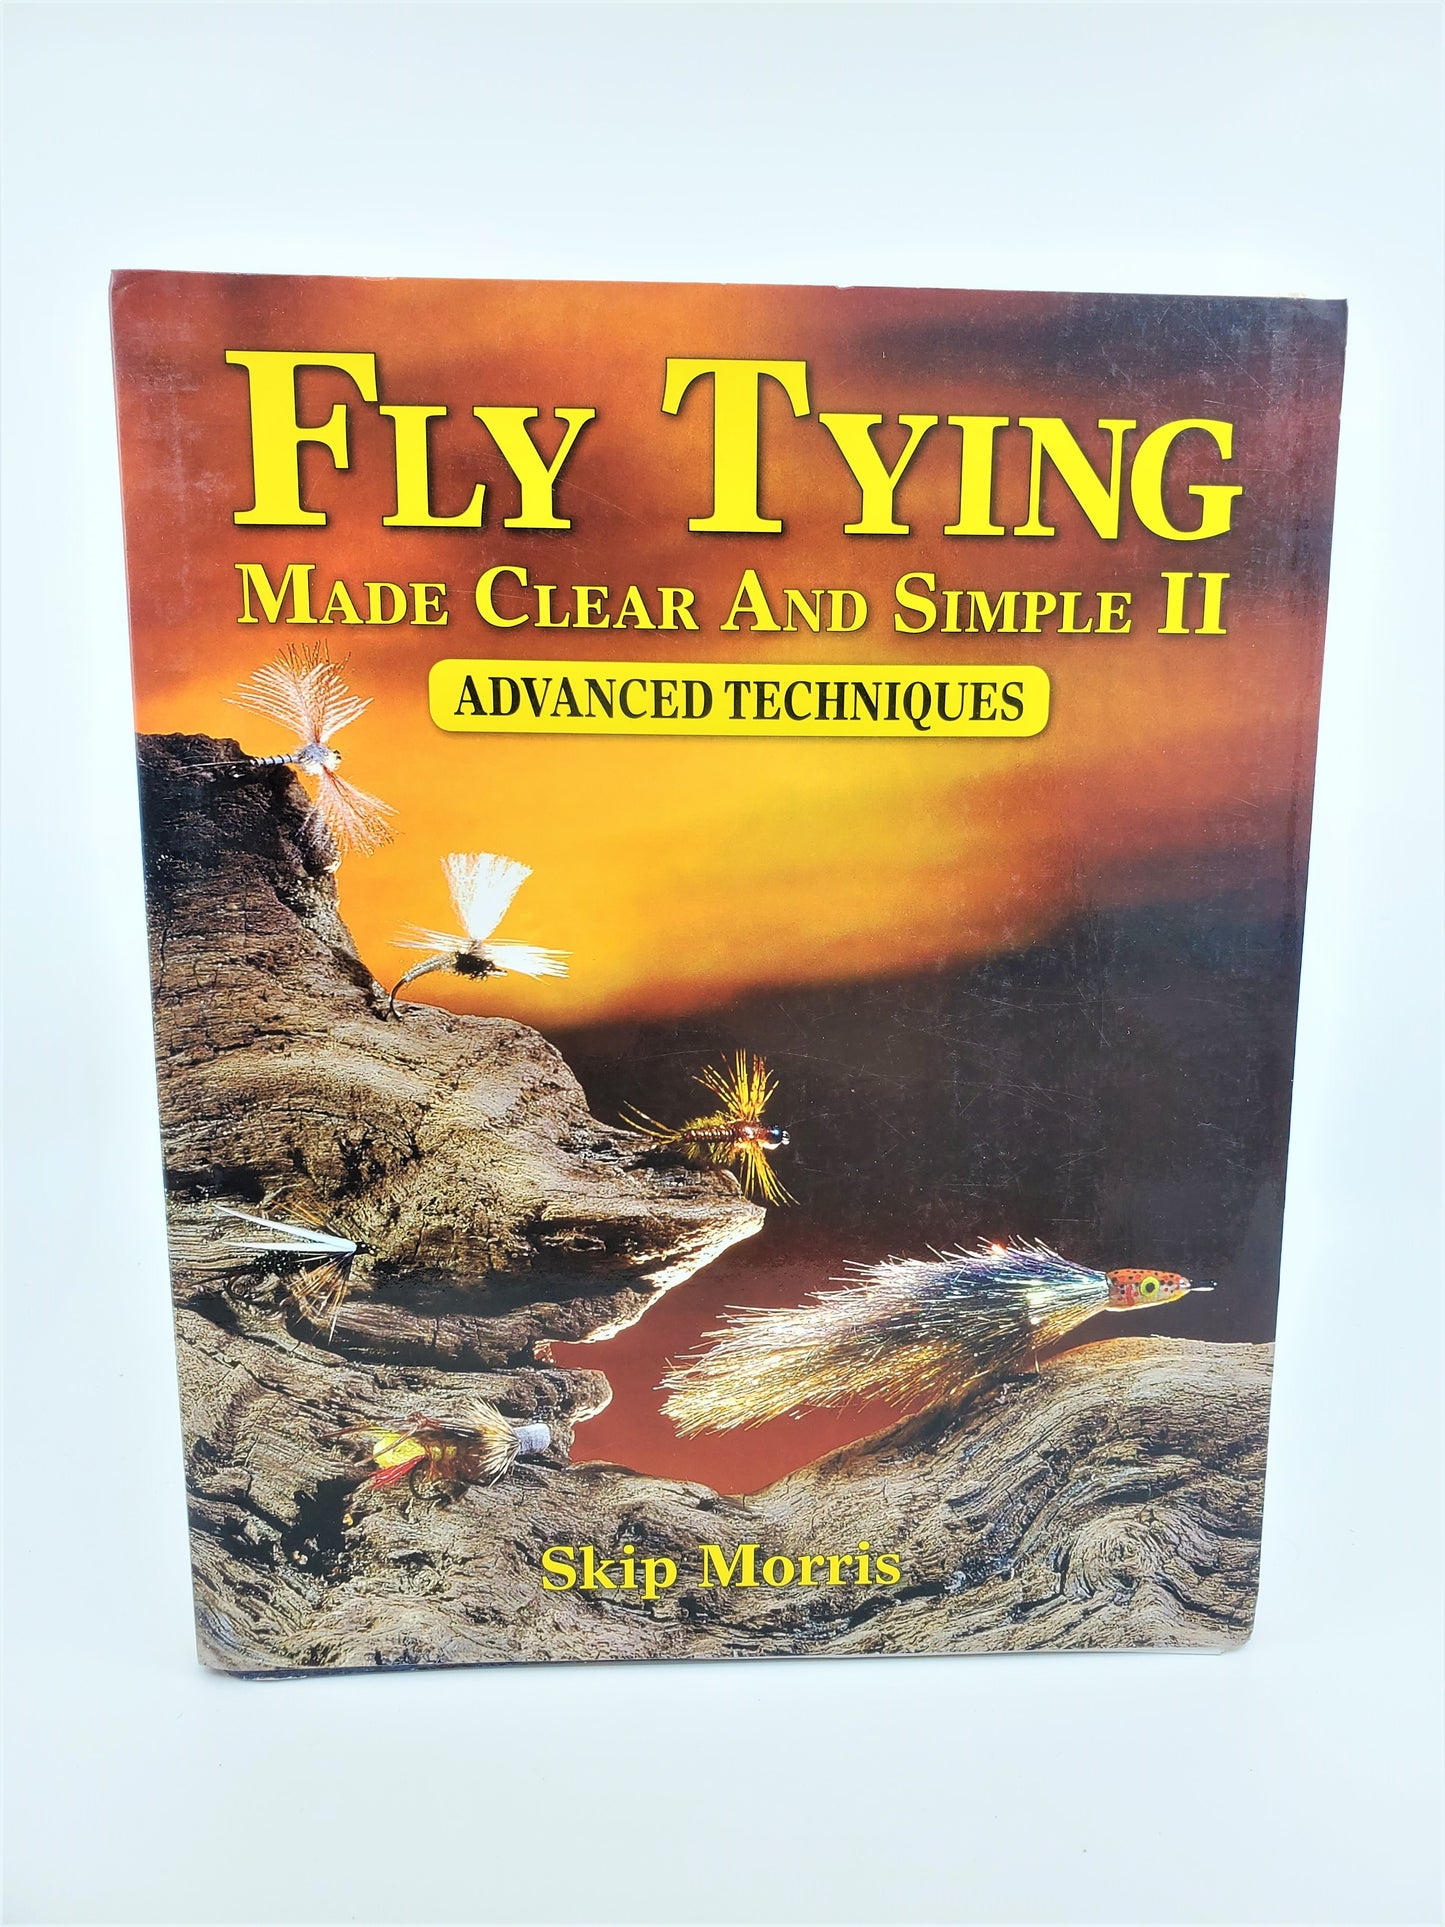 Fly Tying Made Clear and Simple II Advanced Techniques